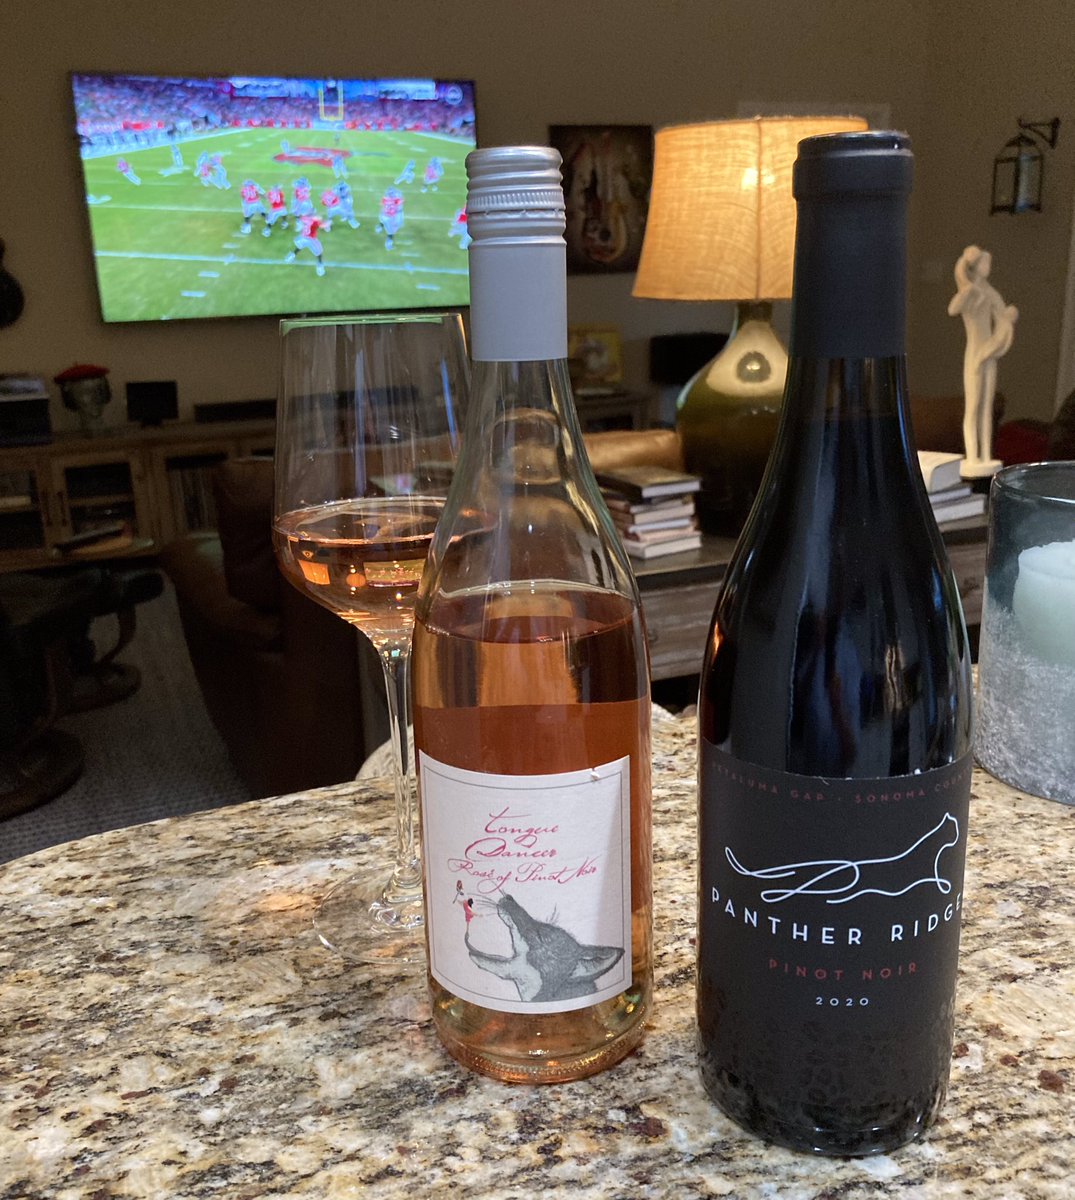 Found this at my front door. Thank you! #PinkSociety and @PantherRidgePN Not sure if Panthers and Foxes get along 🤔, so going to put the Panther down for a nap, while I enjoy the 2022 @TonguedancerPN Rose’ with my chicken pot pie and @Buccaneers #MondayNightFootball #Cheers🍷